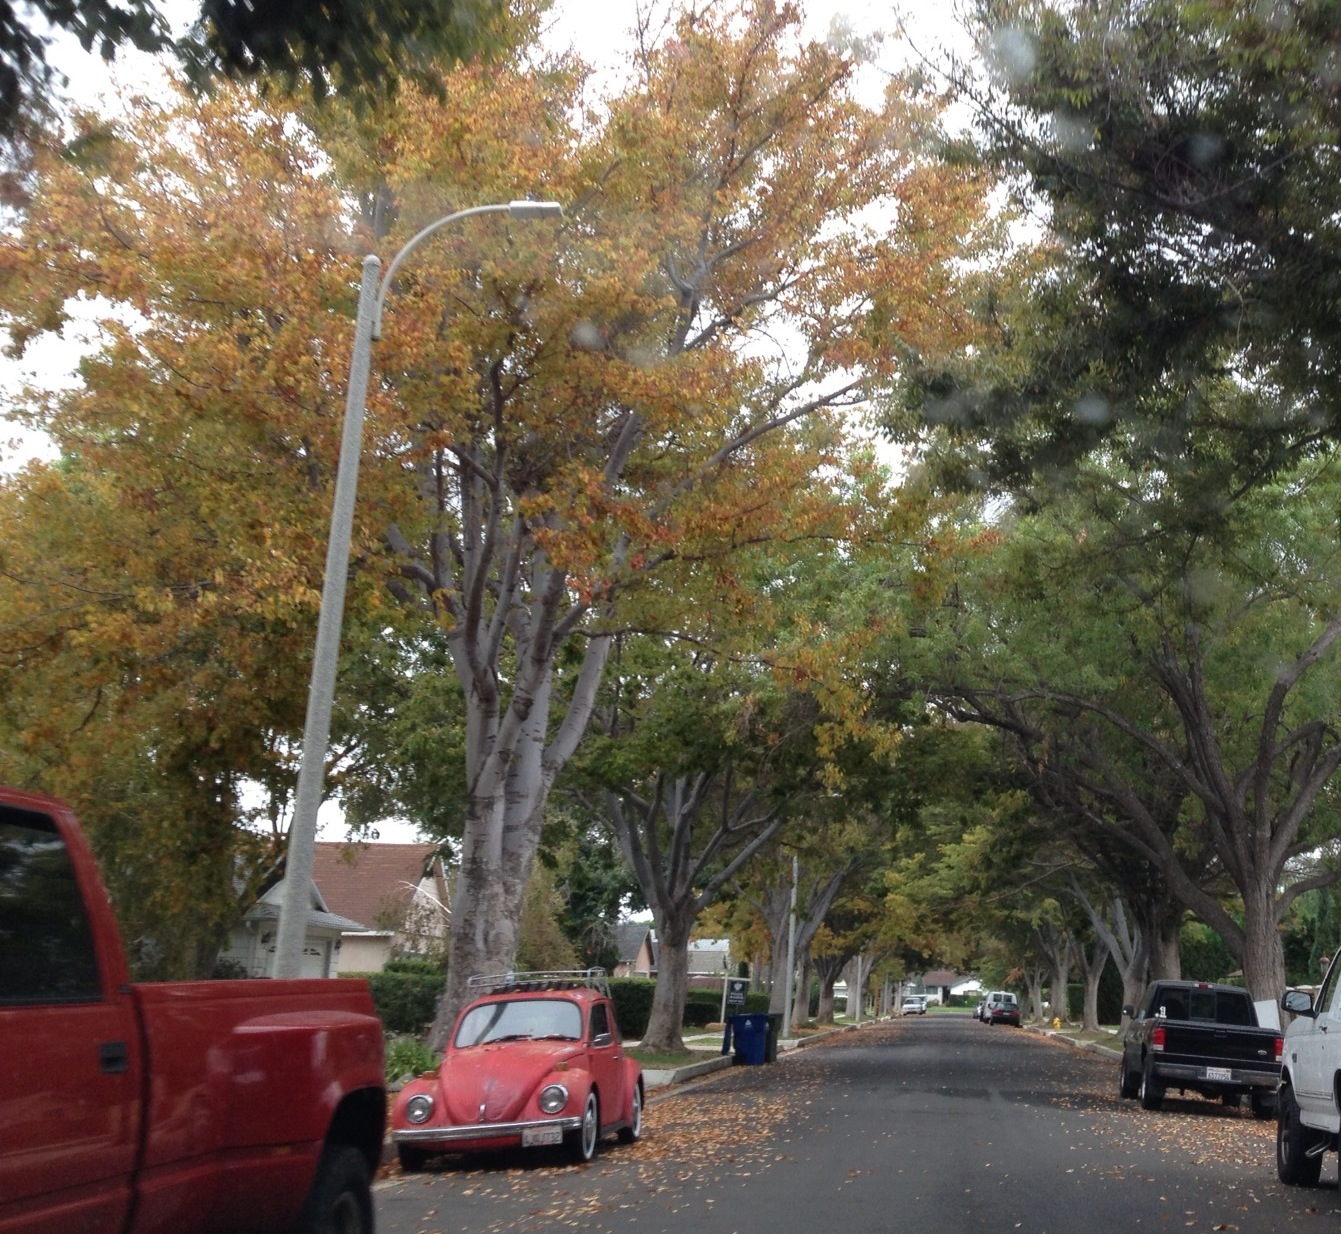 Viva Lost Angeles!: Fall color in Los Angeles!